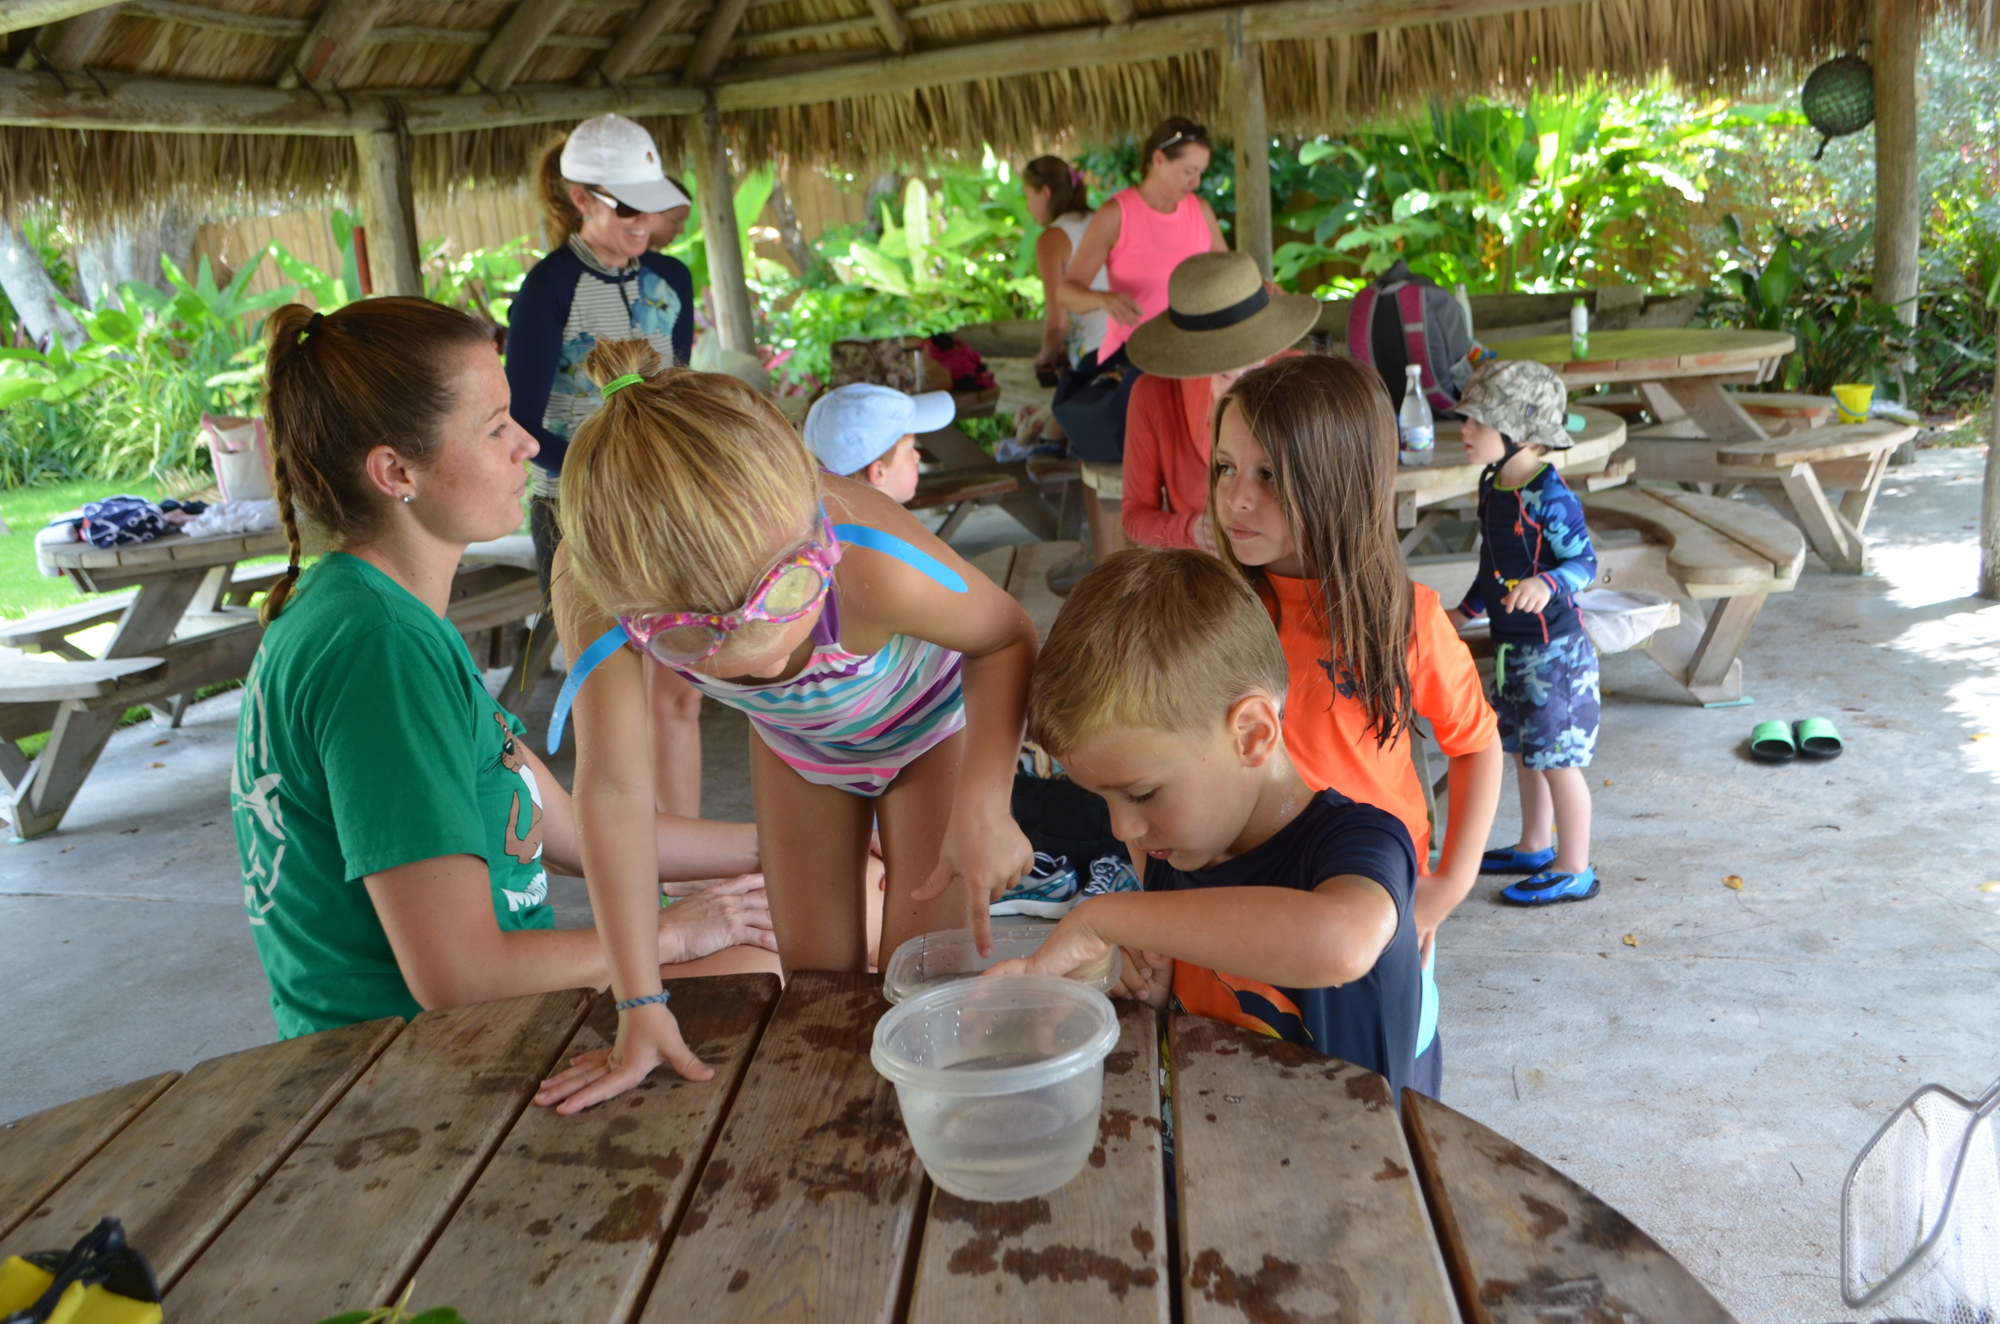 Makaela Leader, 4, and Harry Duke, 5, check out the marine wildlife campers found in the water during 